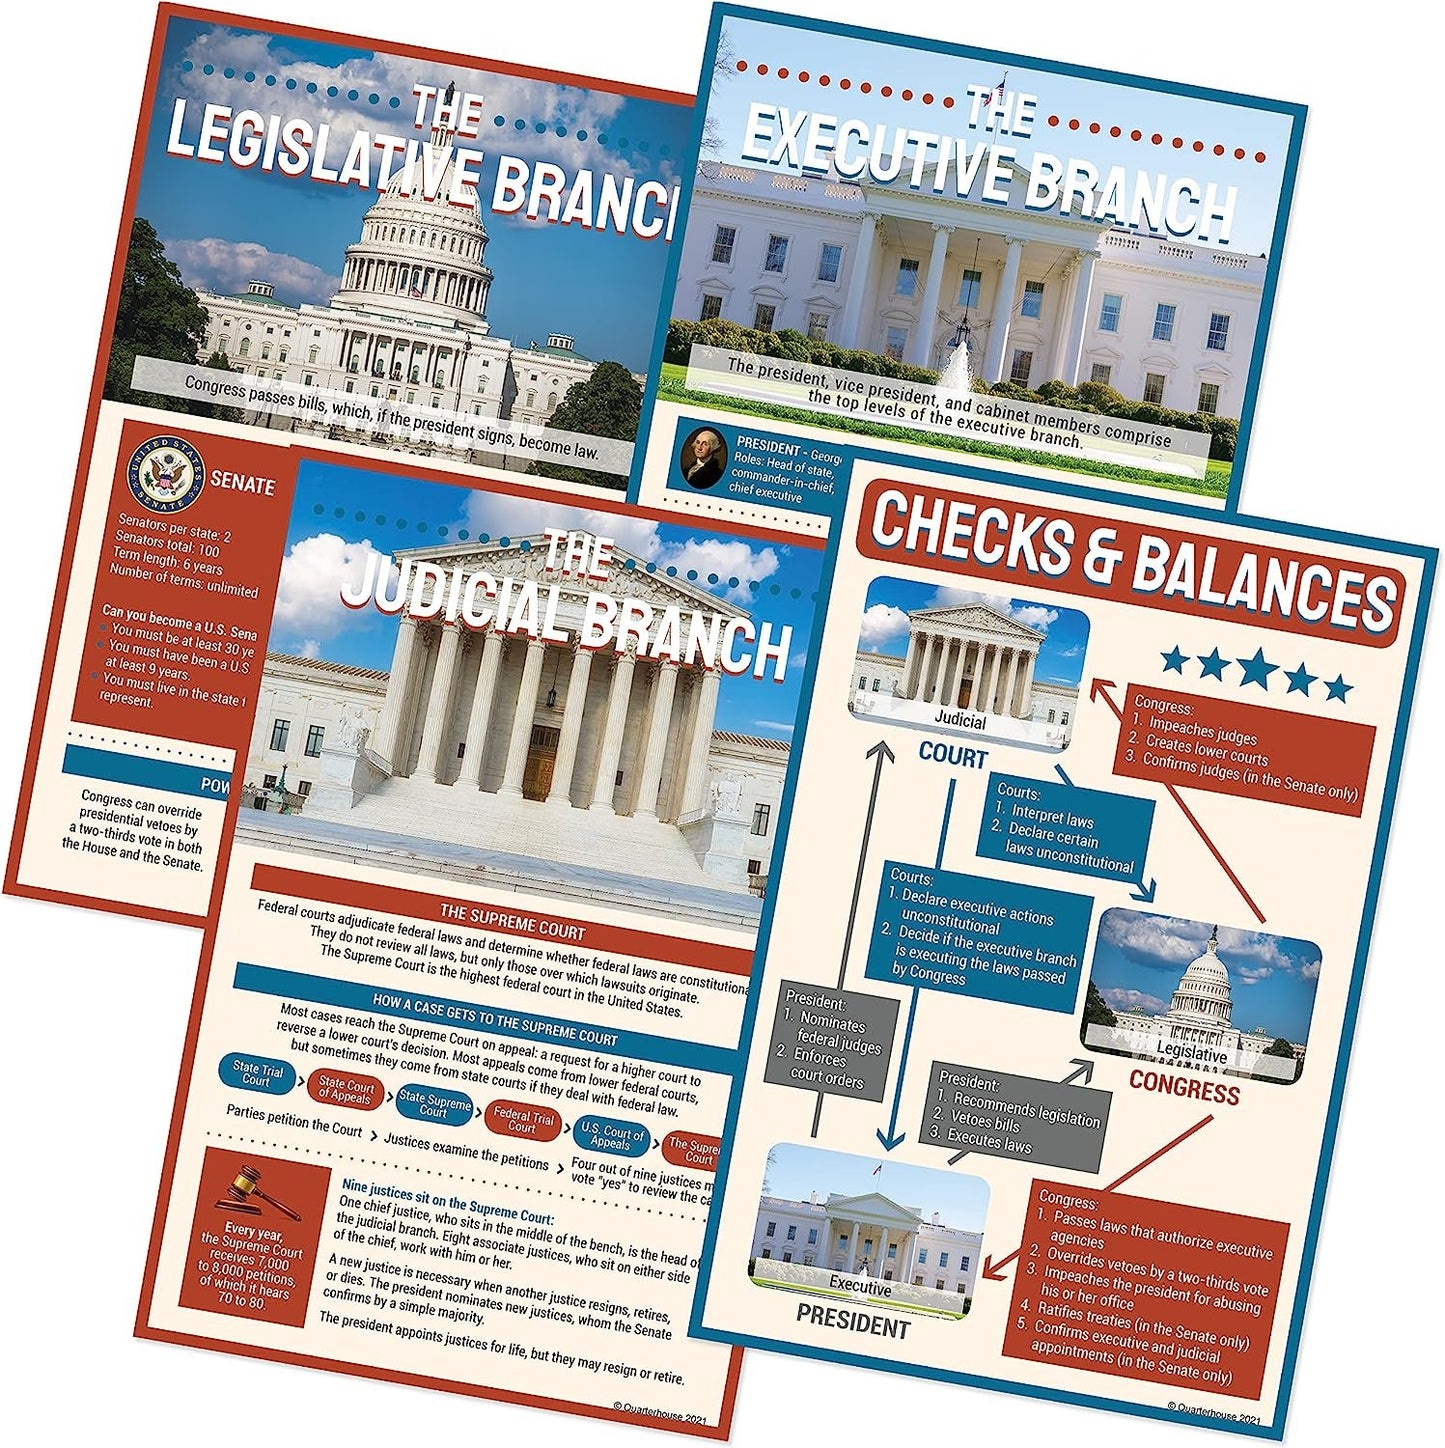 Quarterhouse Three Branches of US Government: Checks and Balances Poster Set, Social Studies Classroom Learning Materials for K-12 Students and Teachers, Set of 4, 12 x 18 Inches, Extra Durable